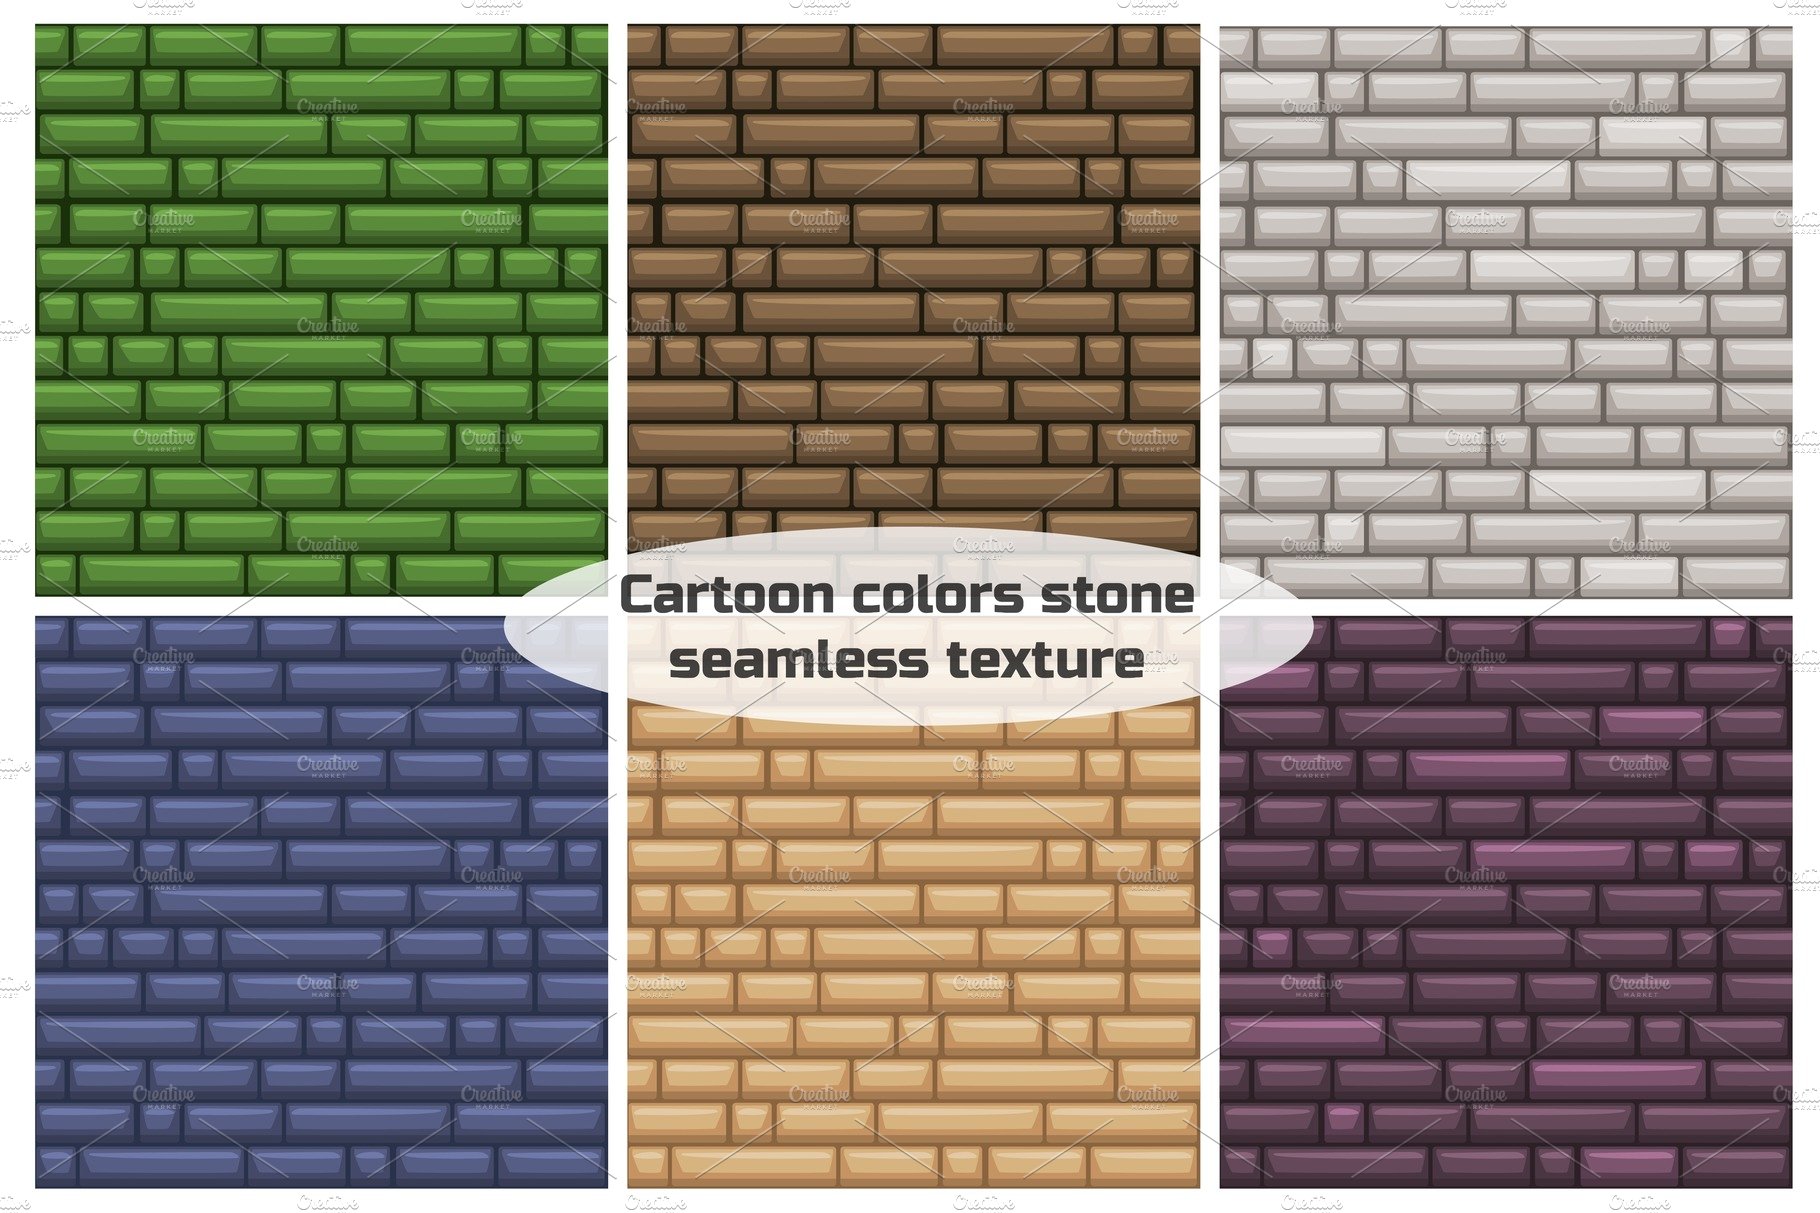 seamless texture different color stone wall cover image.